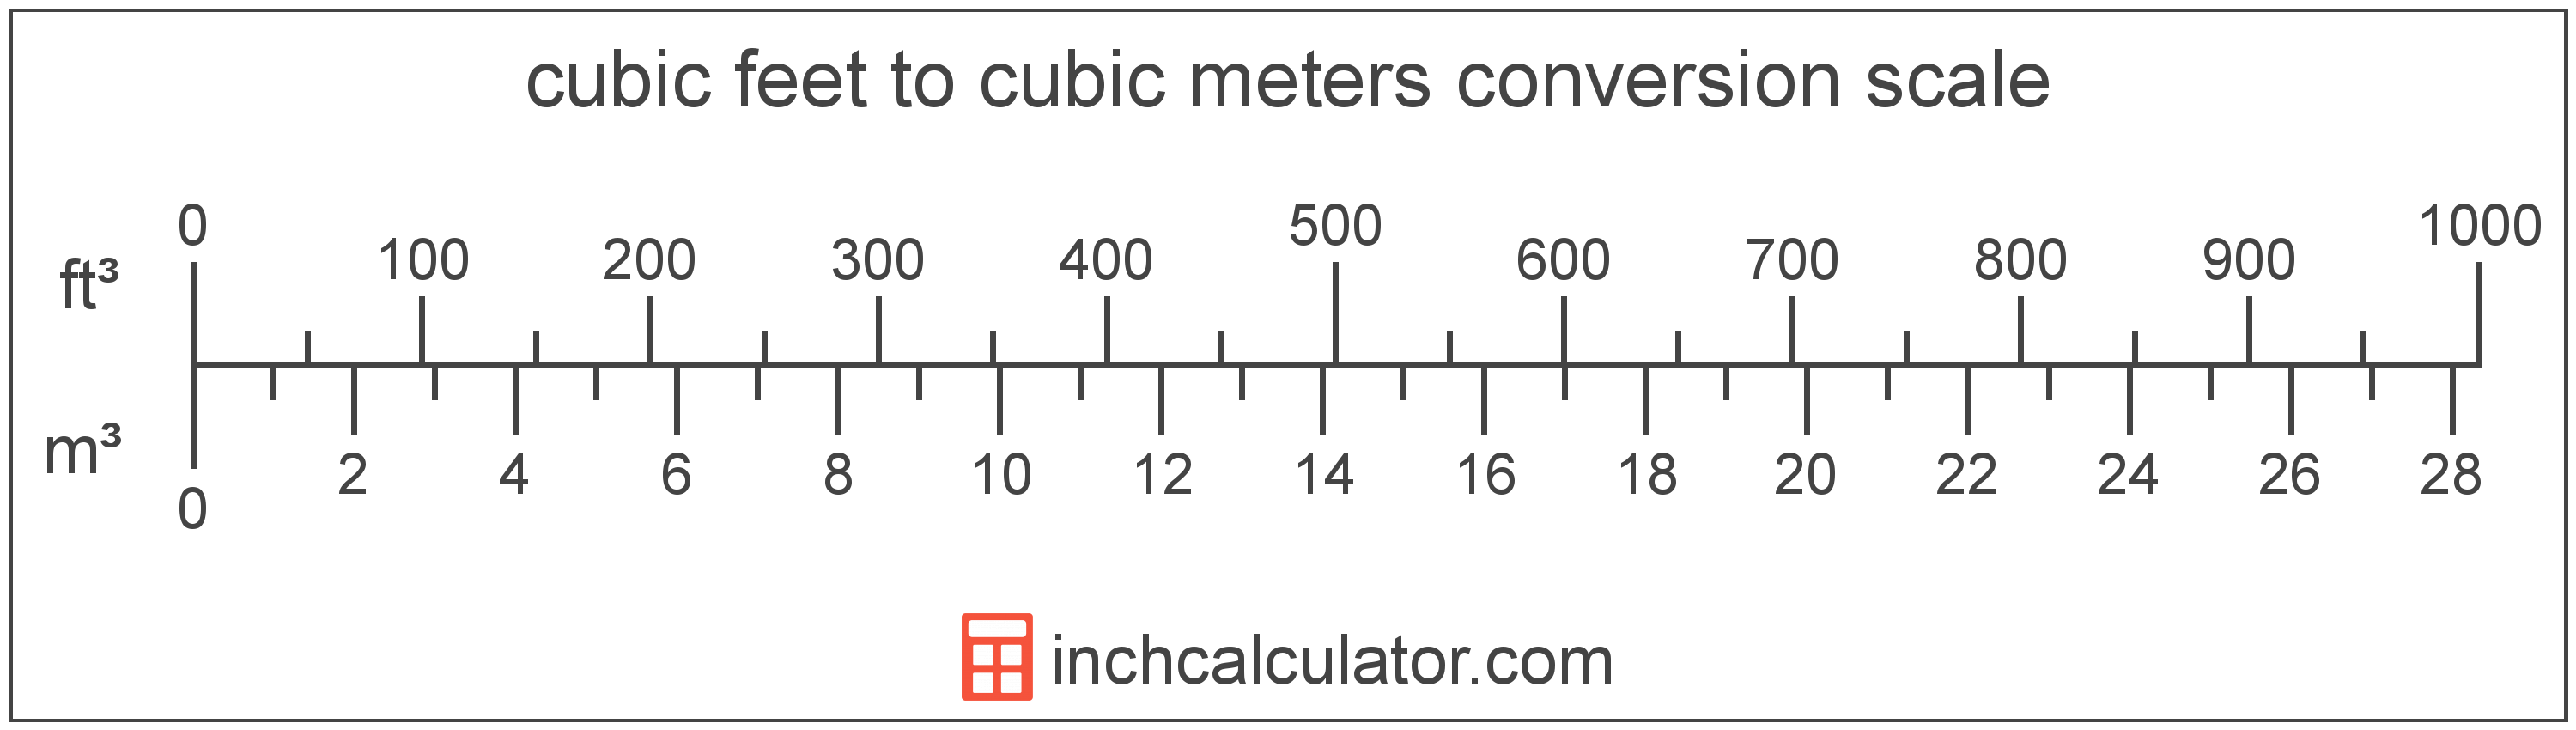 conversion scale showing cubic feet and equivalent cubic meters volume values